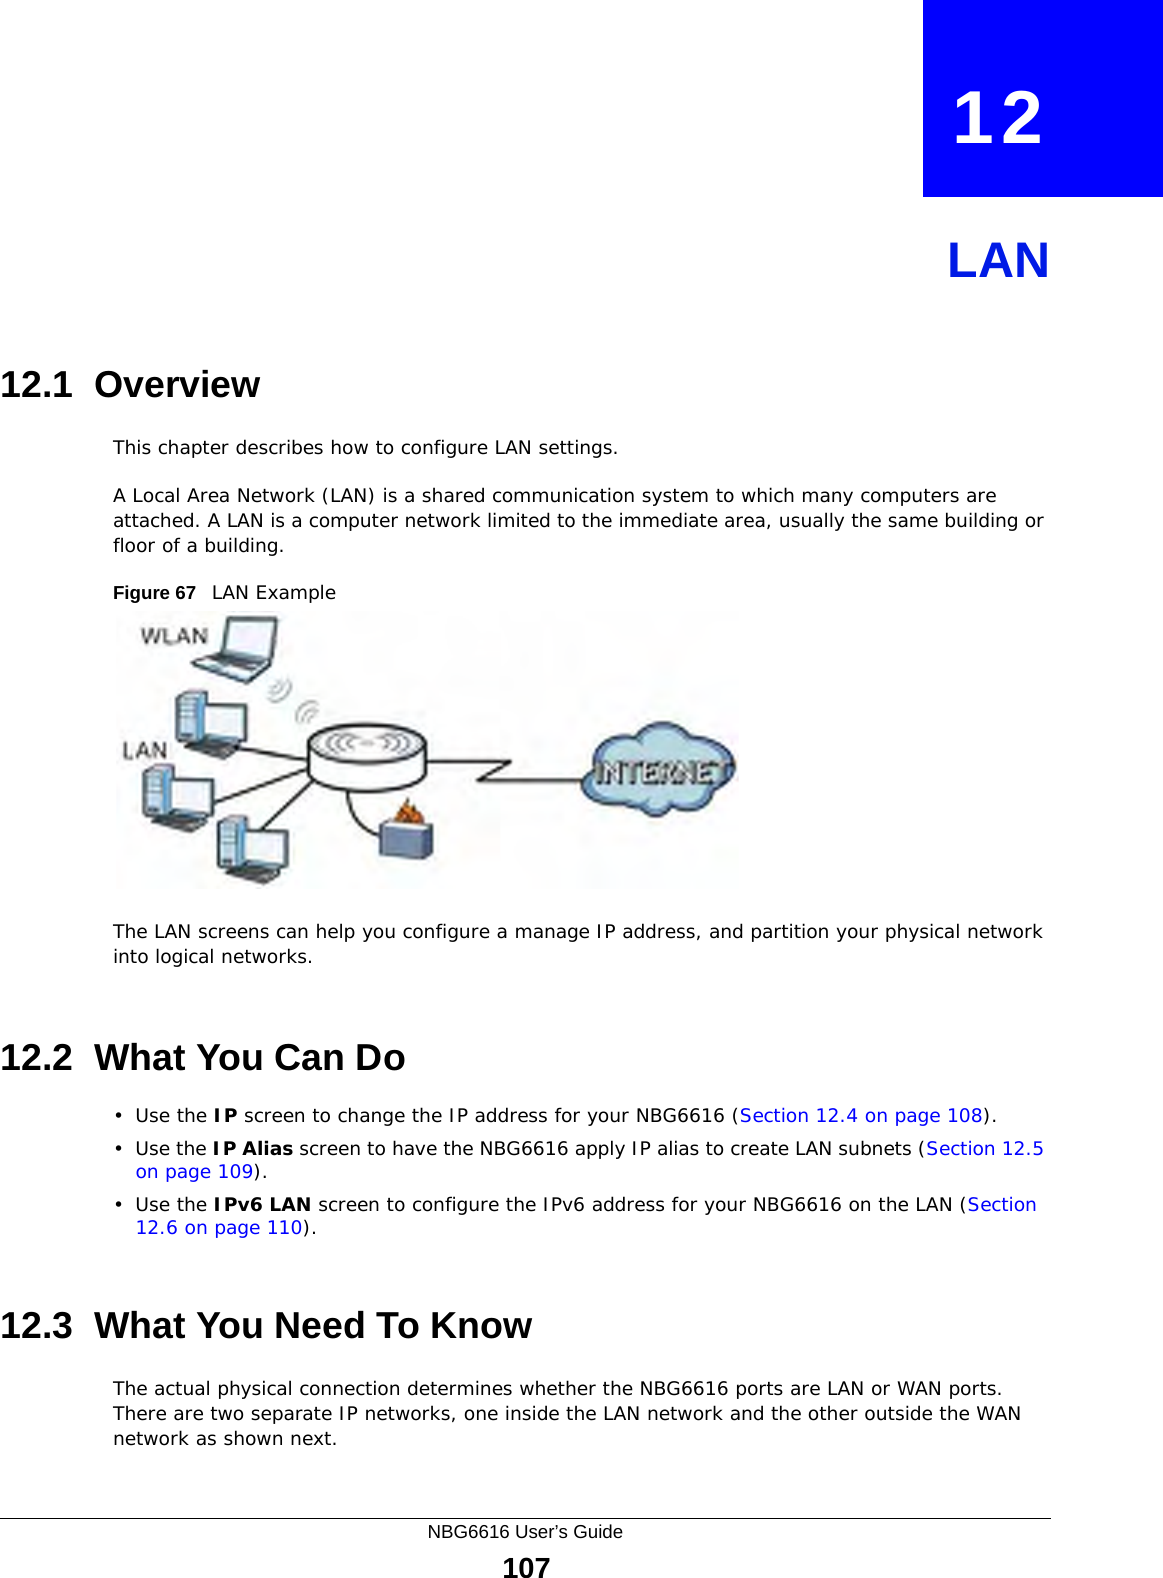 NBG6616 User’s Guide107CHAPTER   12LAN12.1  OverviewThis chapter describes how to configure LAN settings.A Local Area Network (LAN) is a shared communication system to which many computers are attached. A LAN is a computer network limited to the immediate area, usually the same building or floor of a building. Figure 67   LAN ExampleThe LAN screens can help you configure a manage IP address, and partition your physical network into logical networks.12.2  What You Can Do•Use the IP screen to change the IP address for your NBG6616 (Section 12.4 on page 108).•Use the IP Alias screen to have the NBG6616 apply IP alias to create LAN subnets (Section 12.5 on page 109).•Use the IPv6 LAN screen to configure the IPv6 address for your NBG6616 on the LAN (Section 12.6 on page 110).12.3  What You Need To KnowThe actual physical connection determines whether the NBG6616 ports are LAN or WAN ports. There are two separate IP networks, one inside the LAN network and the other outside the WAN network as shown next.